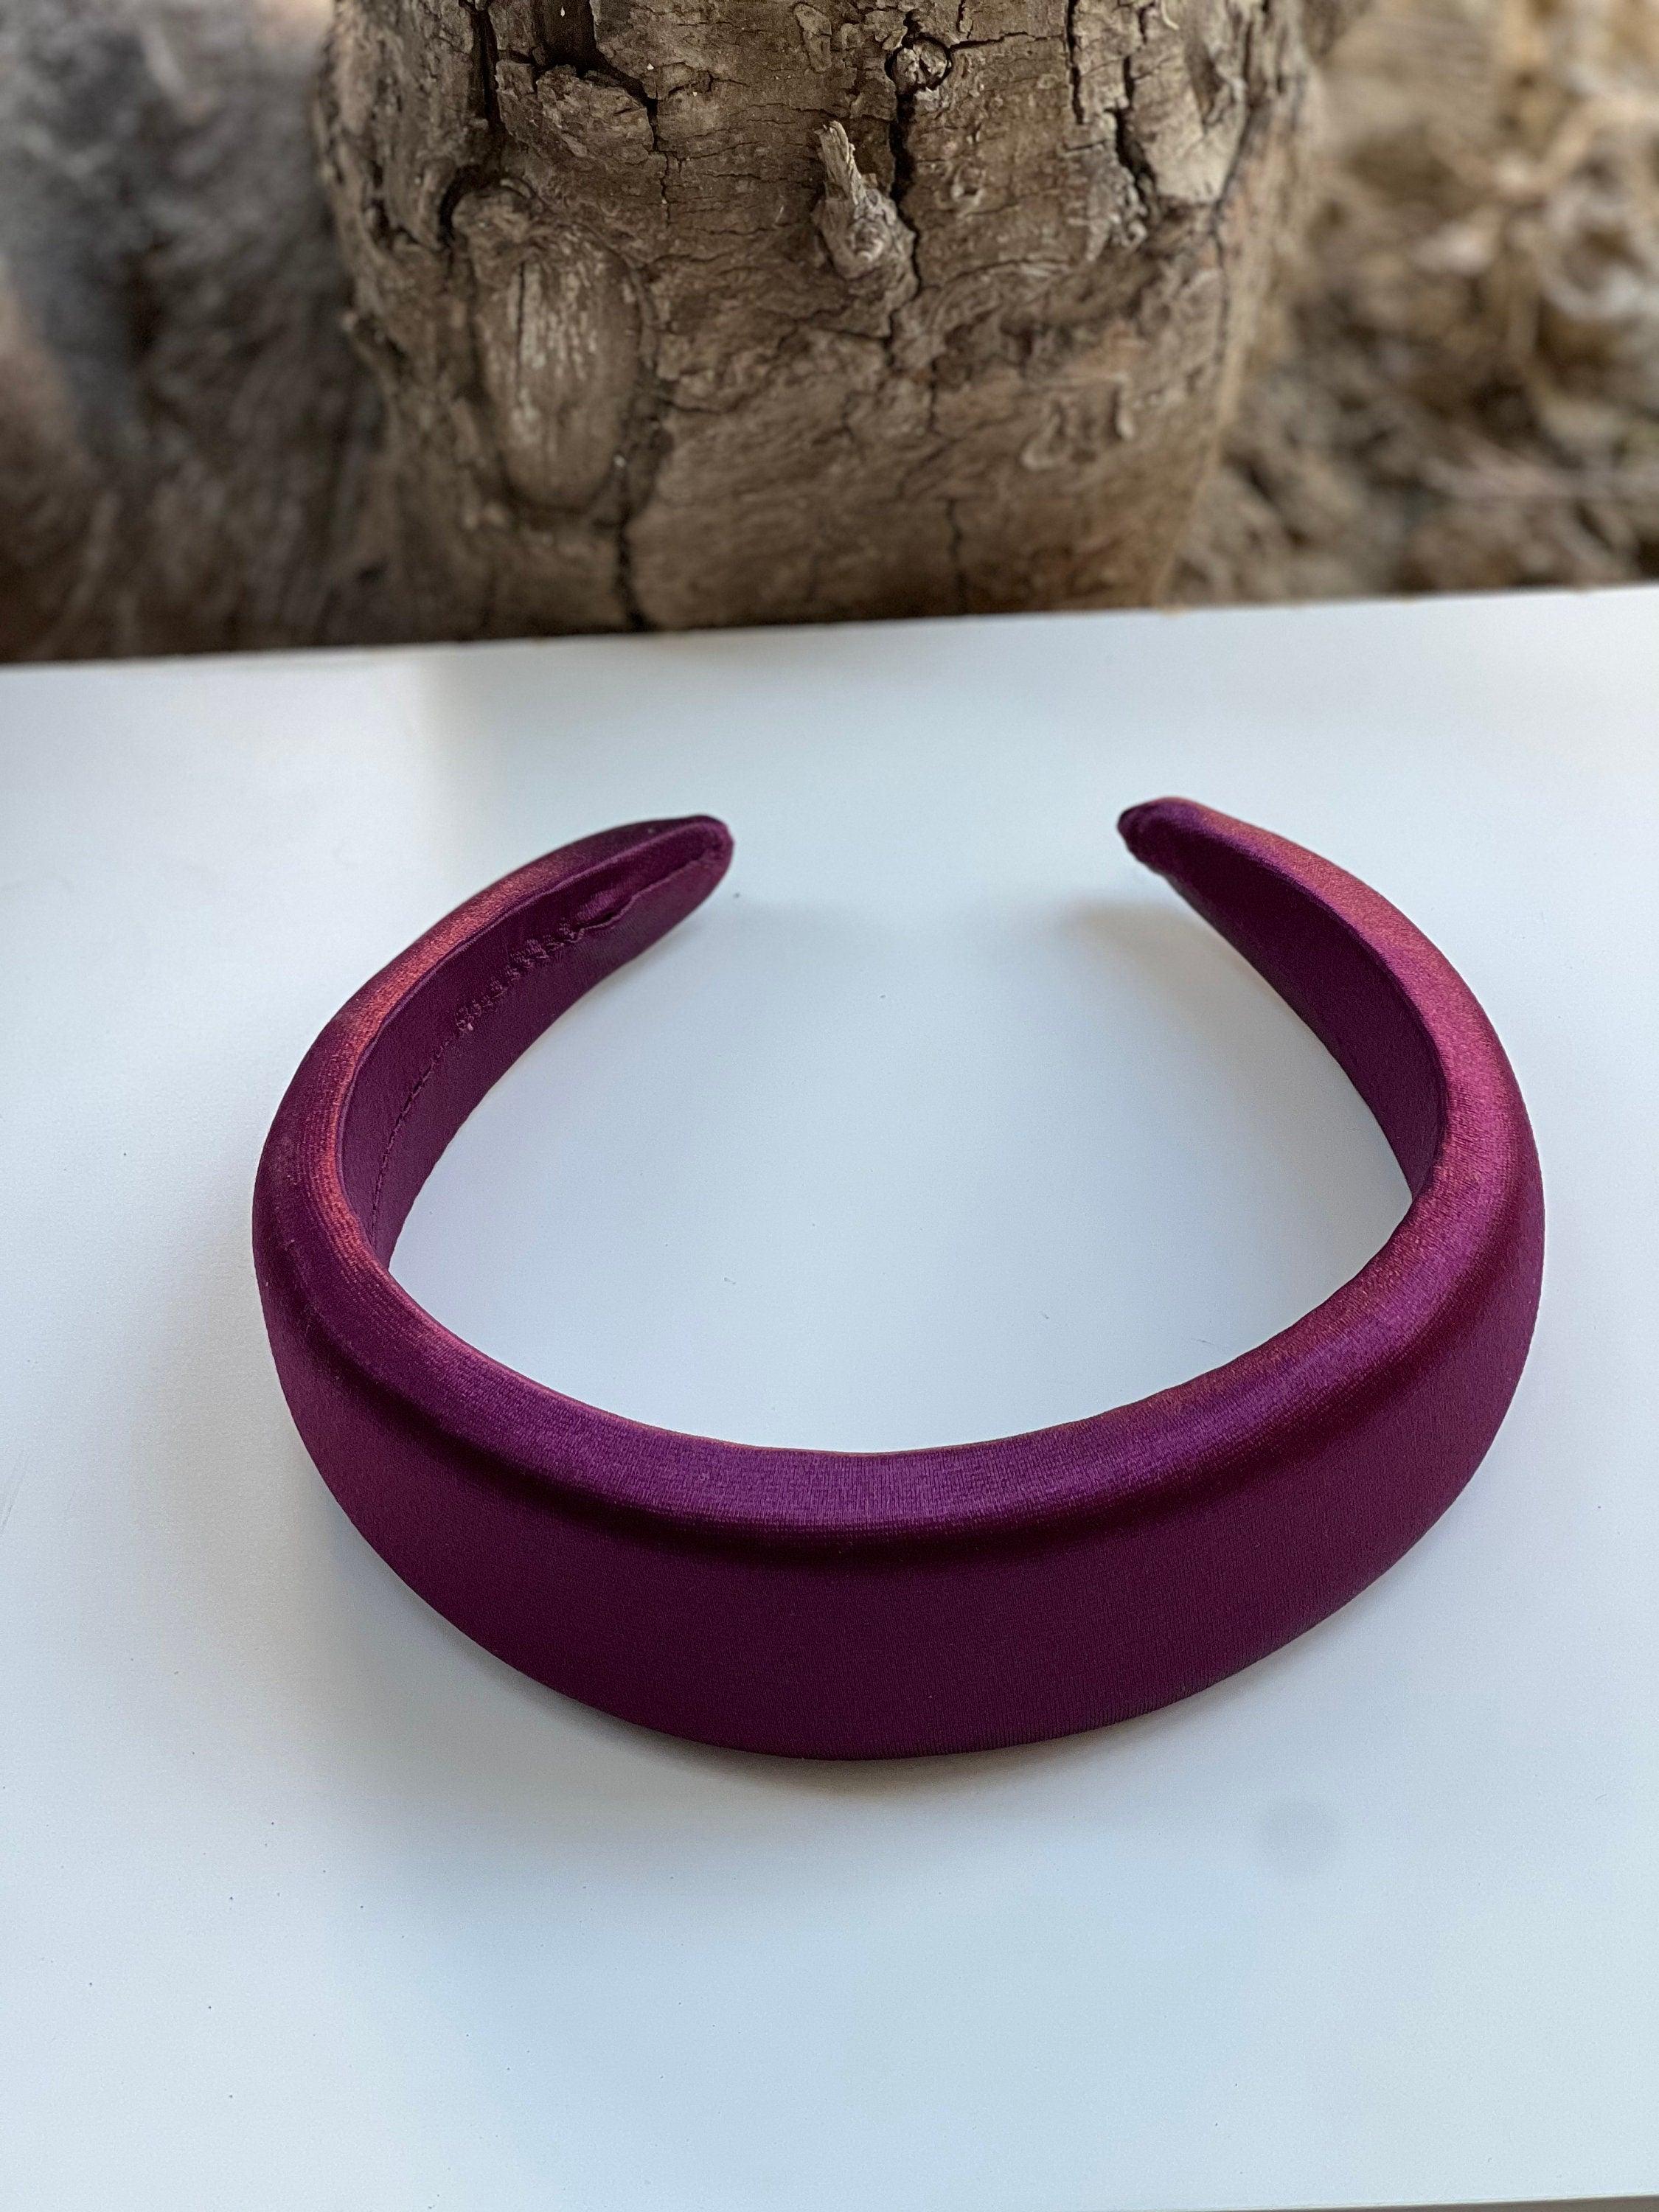 Handcrafted Maroon Satin Headband with Padded Wine-Colored Classic Design for Women's Fashion Hair Accessories available at Moyoni Design